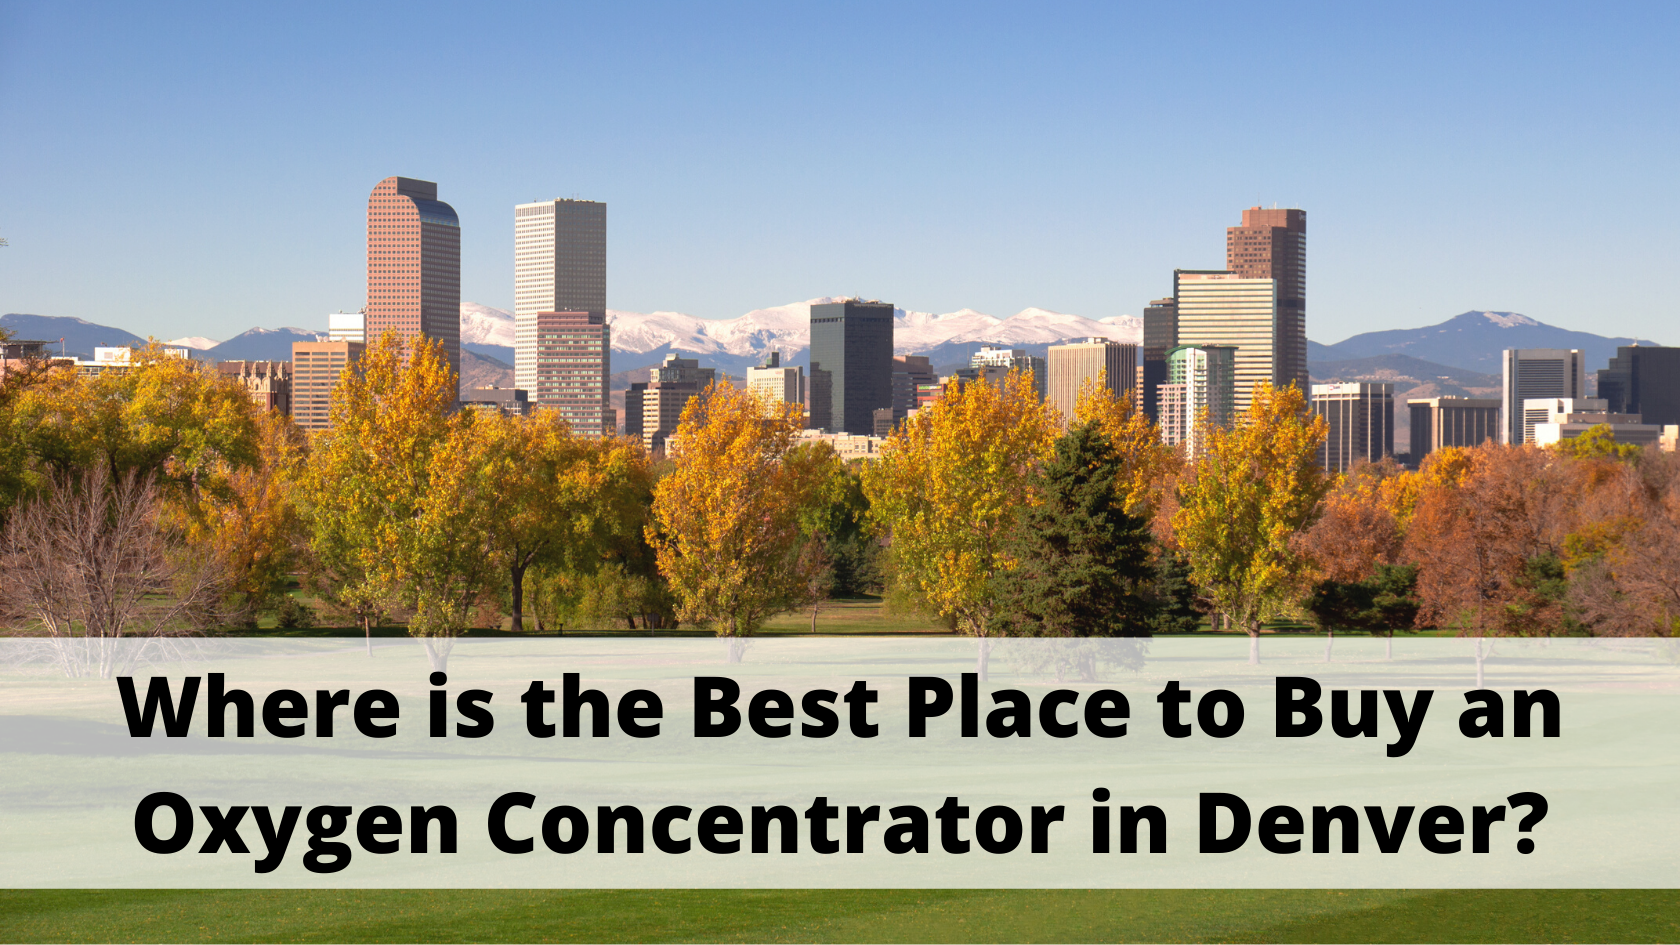 Where is the Best Place to Buy an Oxygen Concentrator in Denver